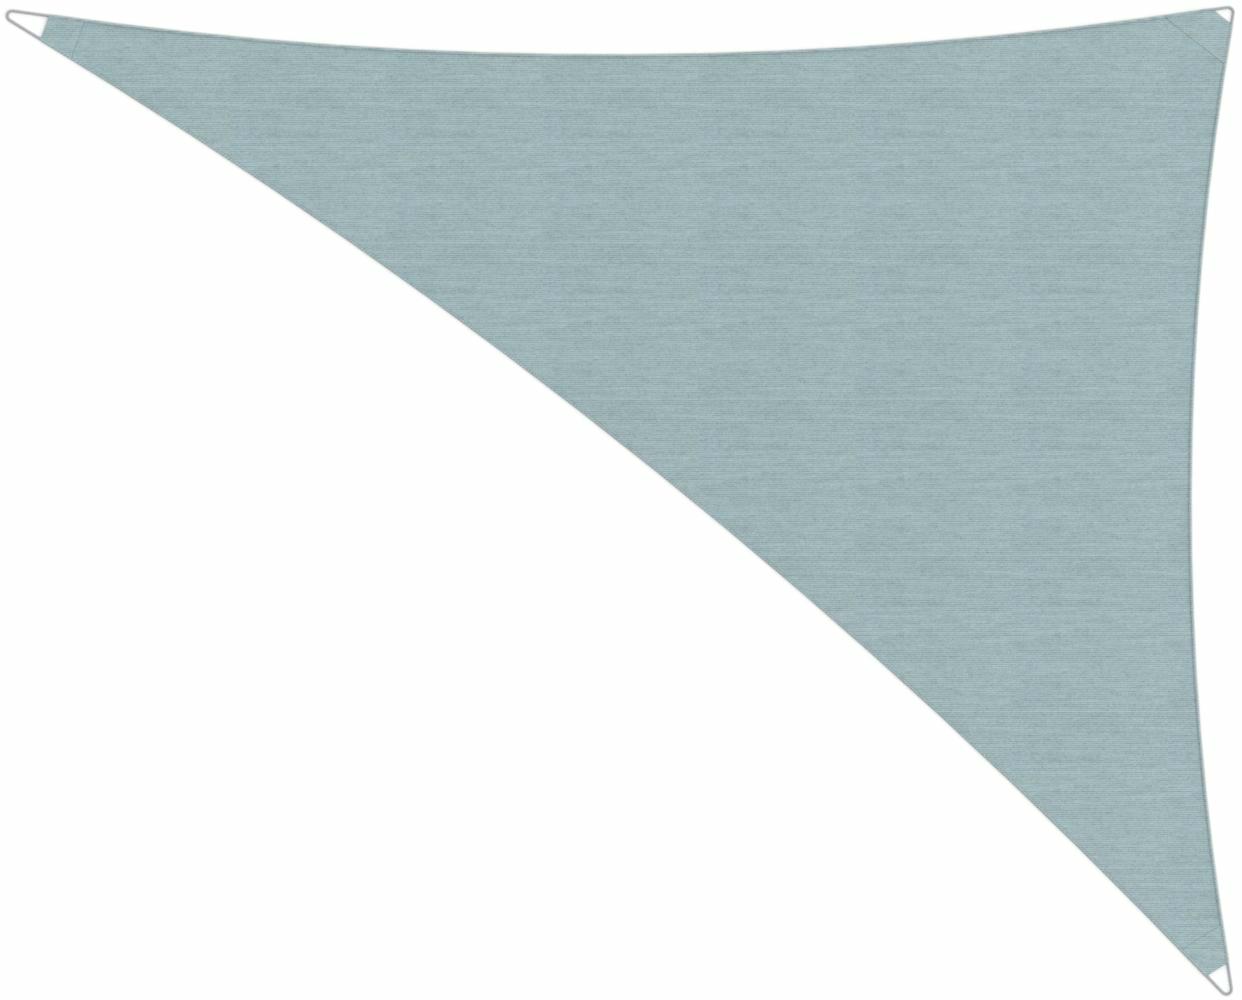 Ingenua shade sail Triangle 4 x 5 x 6,4 m, for outdoor use. Colour of the fabric shade sail Curacao.